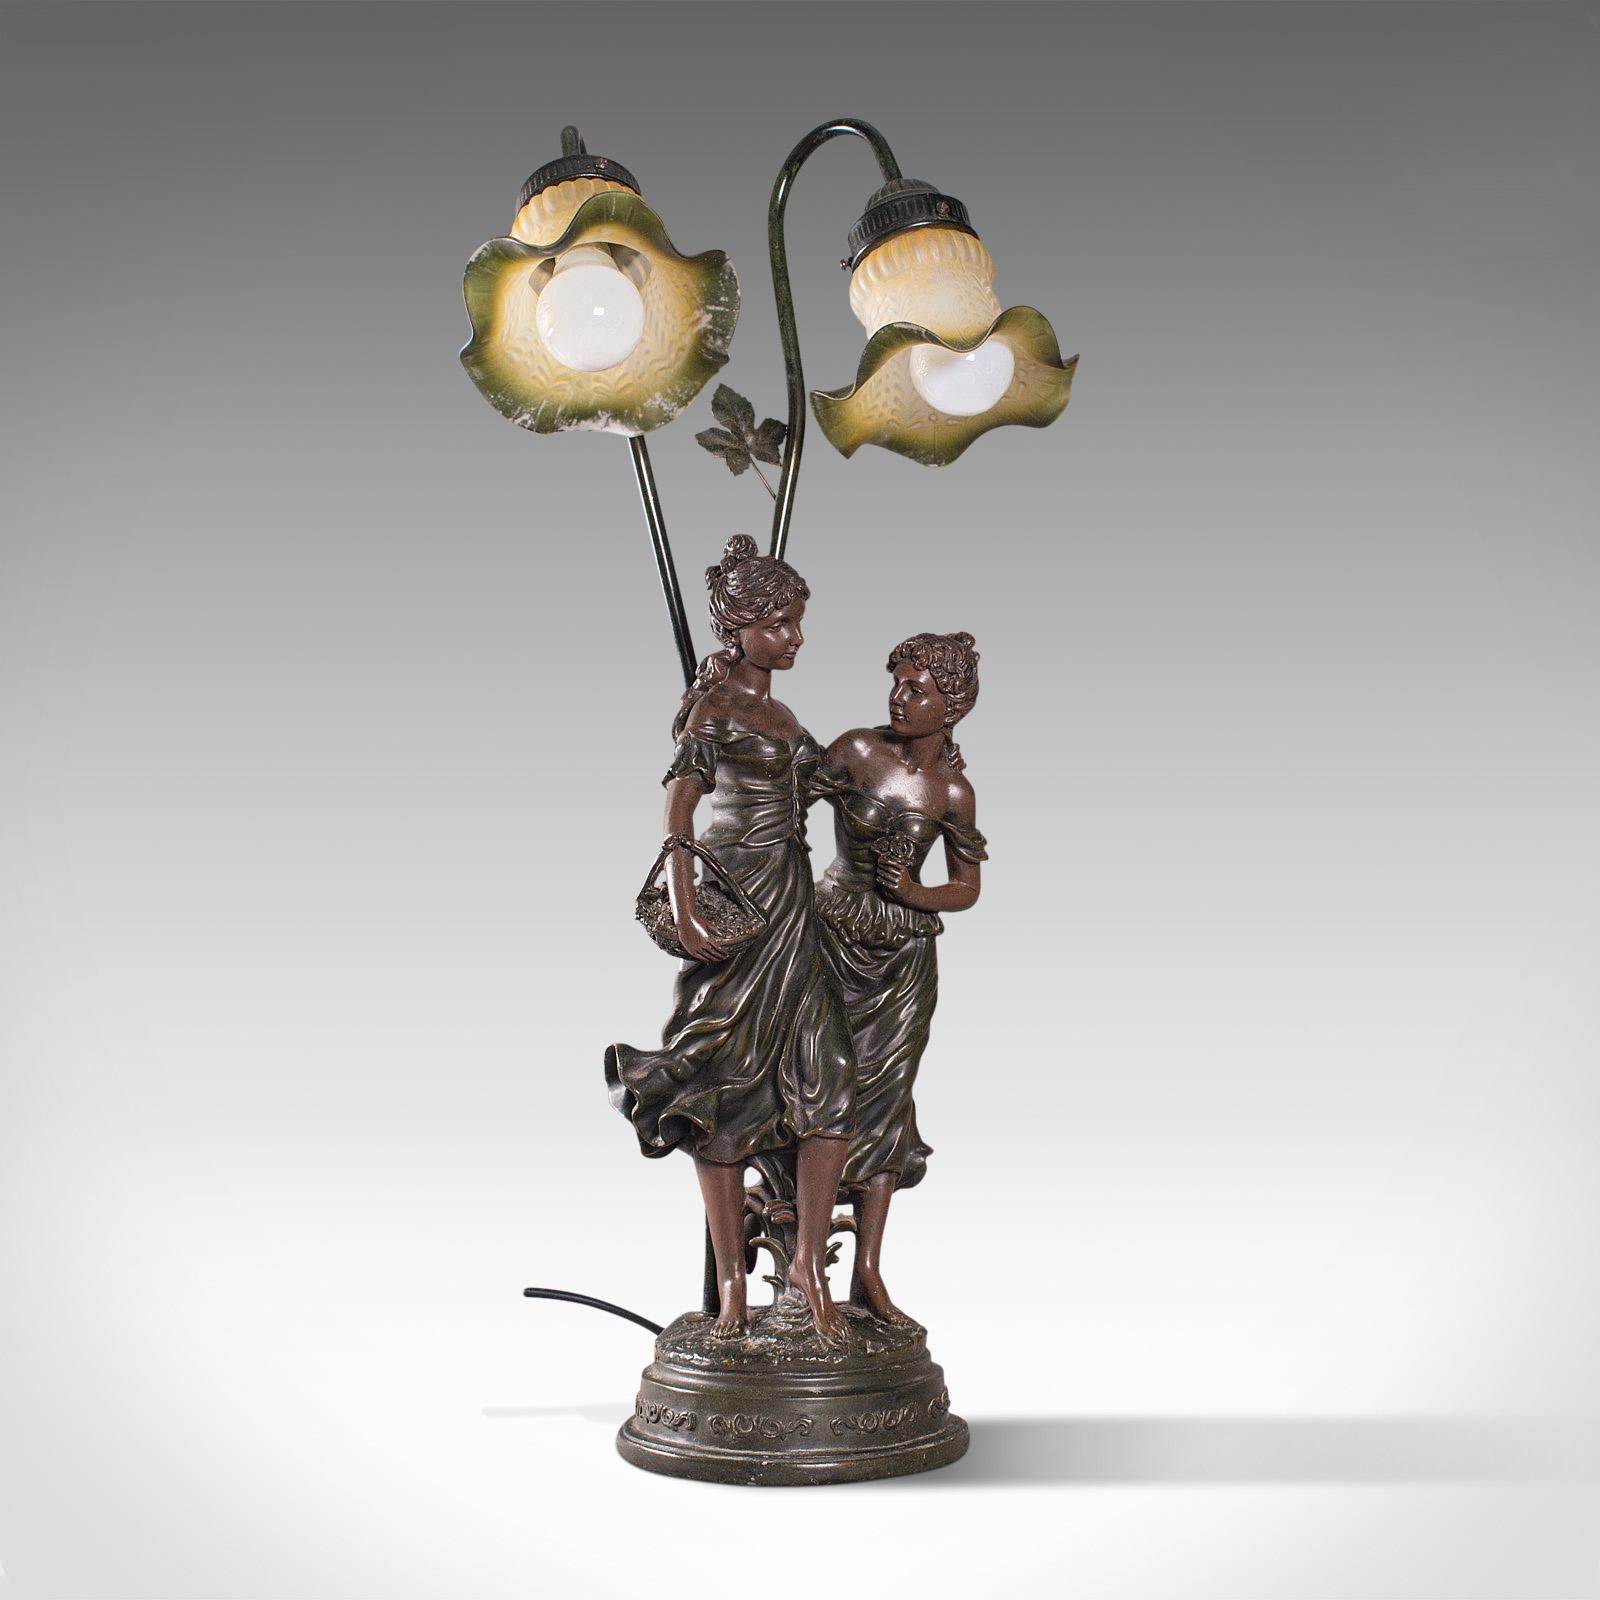 This is a tall, vintage decorative lamp. A French, spelter bronze figural table light in the form of two females, dating to the late 20th century, circa 1970. 

Characterful lamp with Art Nouveau overtones
Displaying a desirable aged patina